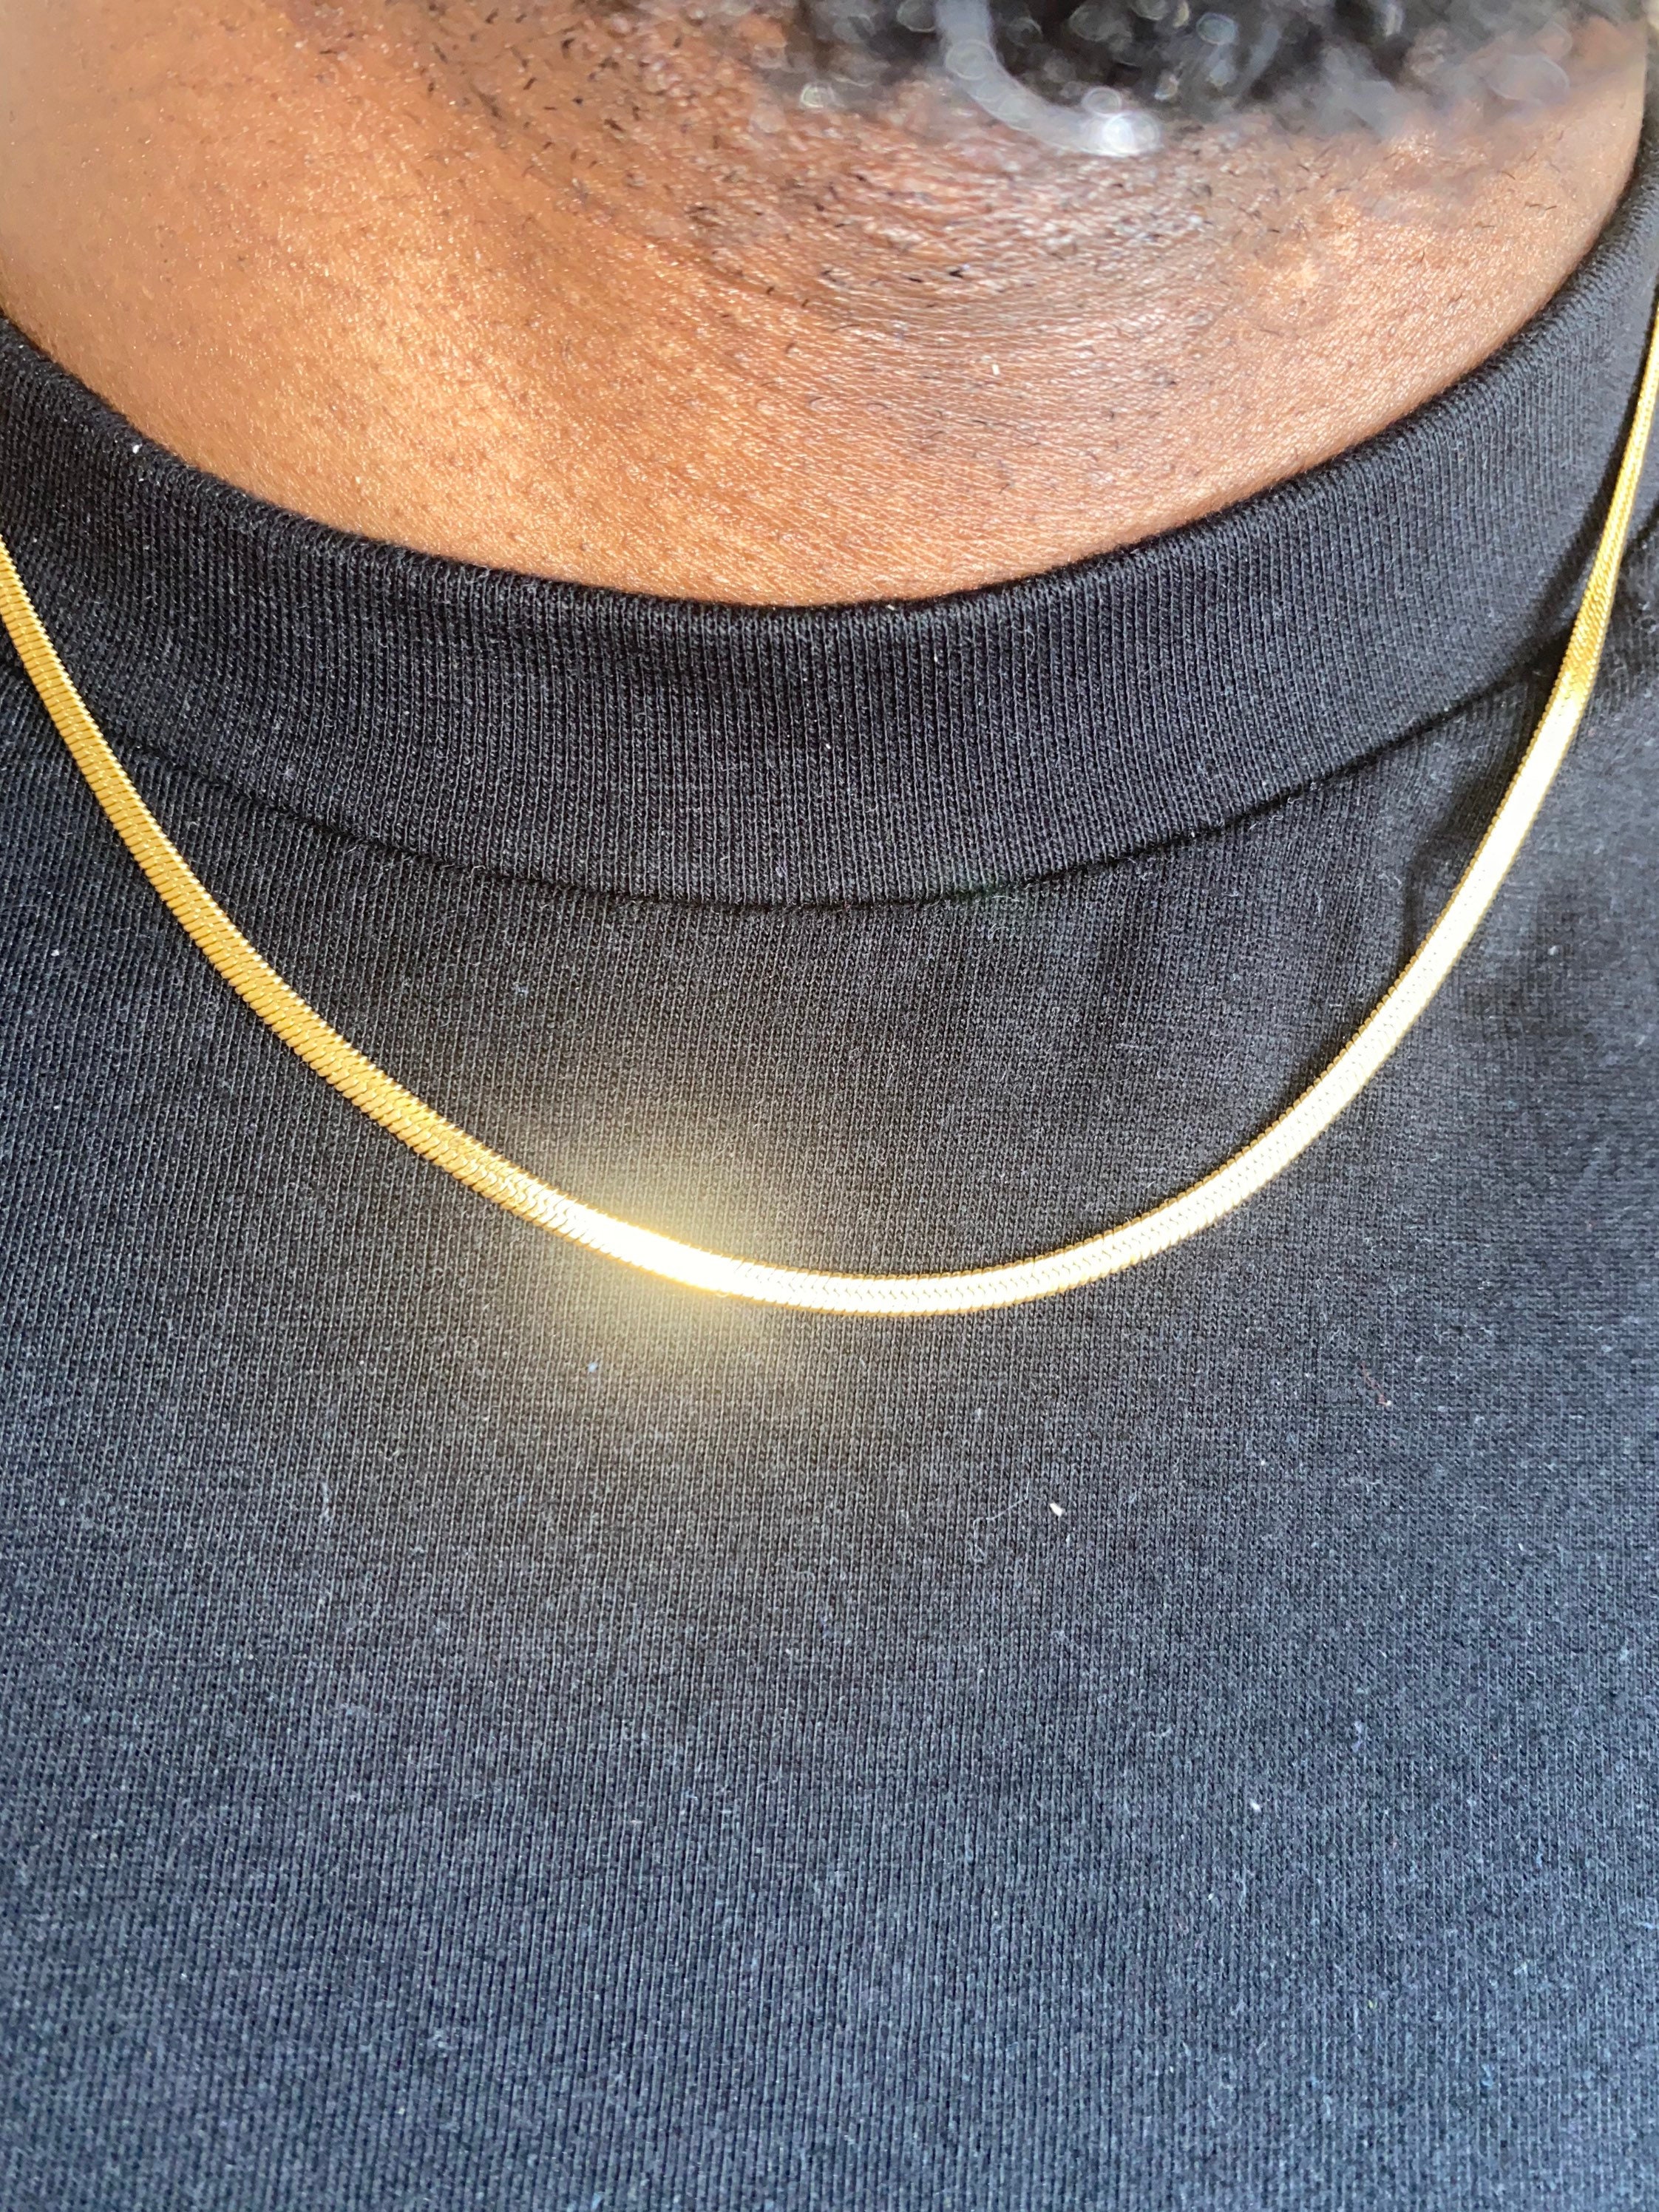 Golden Herringbone Chain Necklace For Hip Hop Men 75cm X 10mm Chunky Chain  Jewelry For Nightclubs And DJs From Frankie_ngok, $11.51 | DHgate.Com